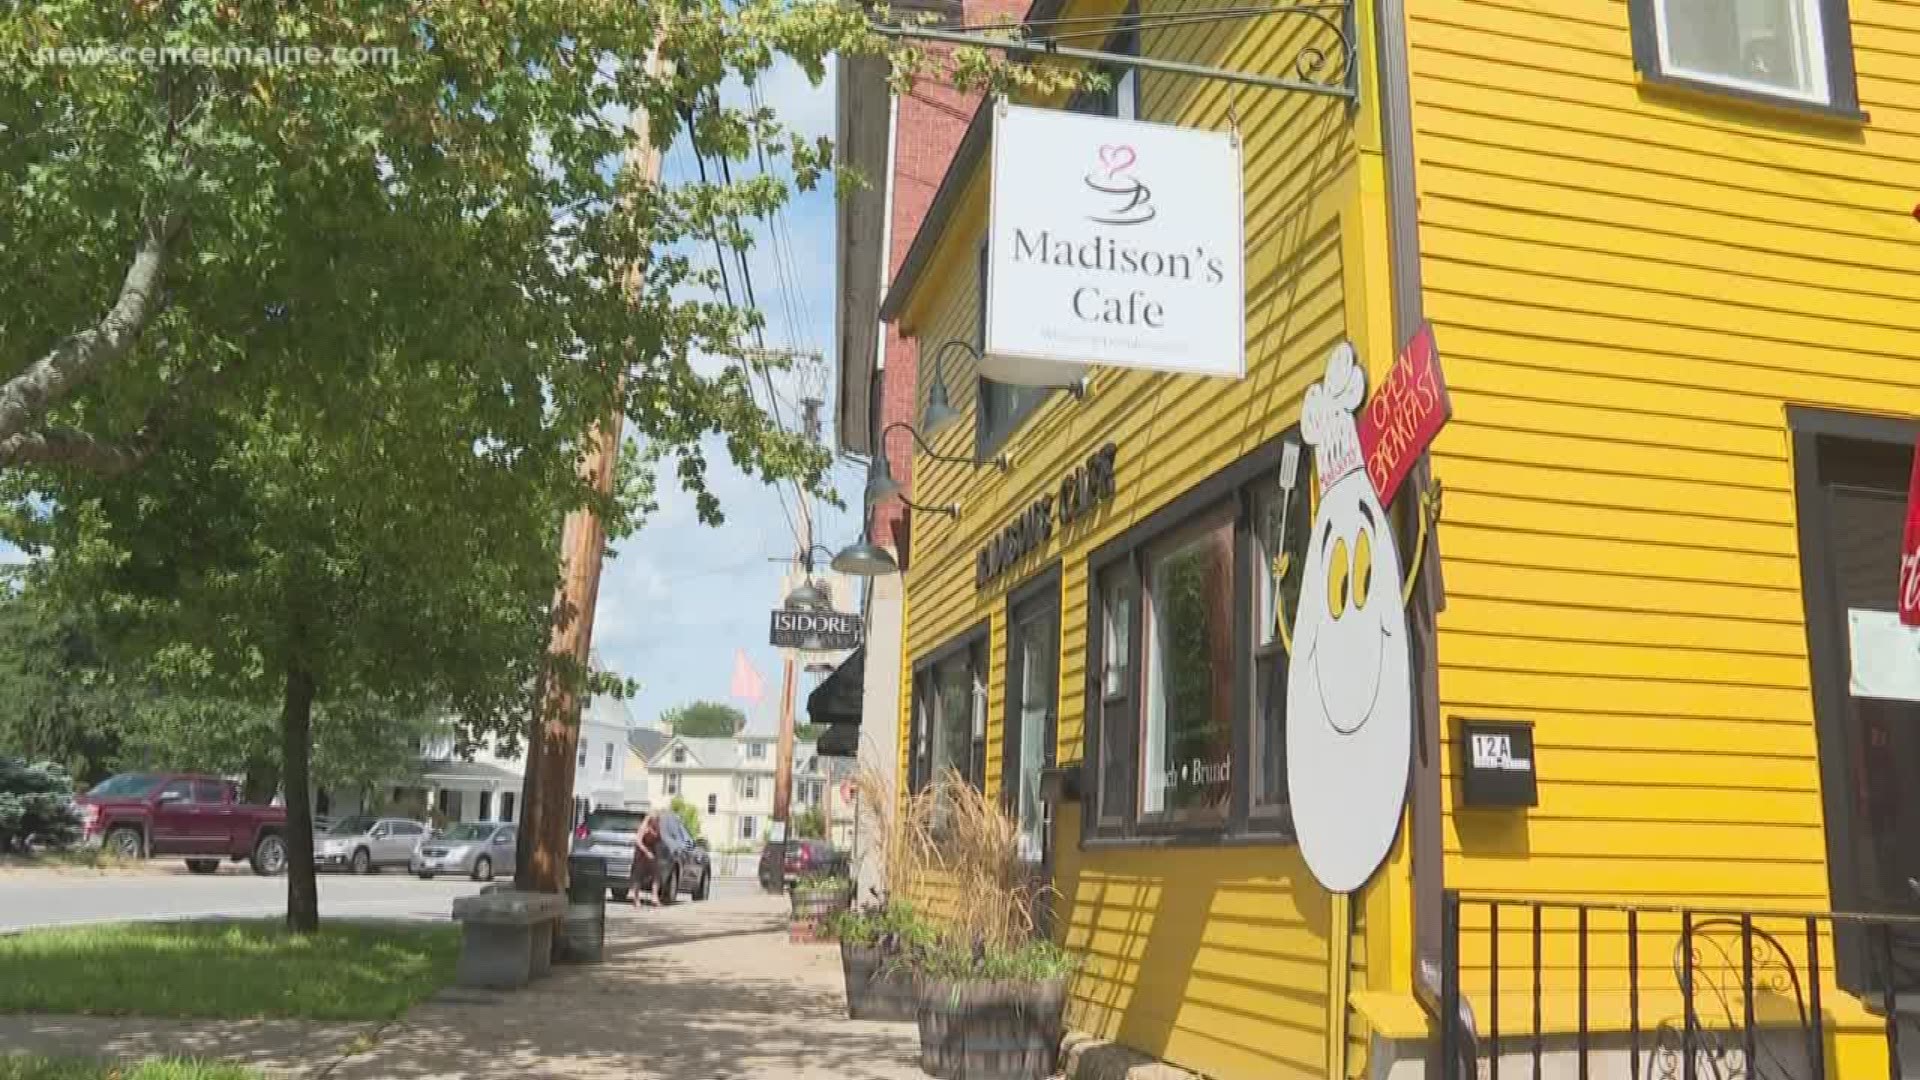 Madison's cafe closes its doors.